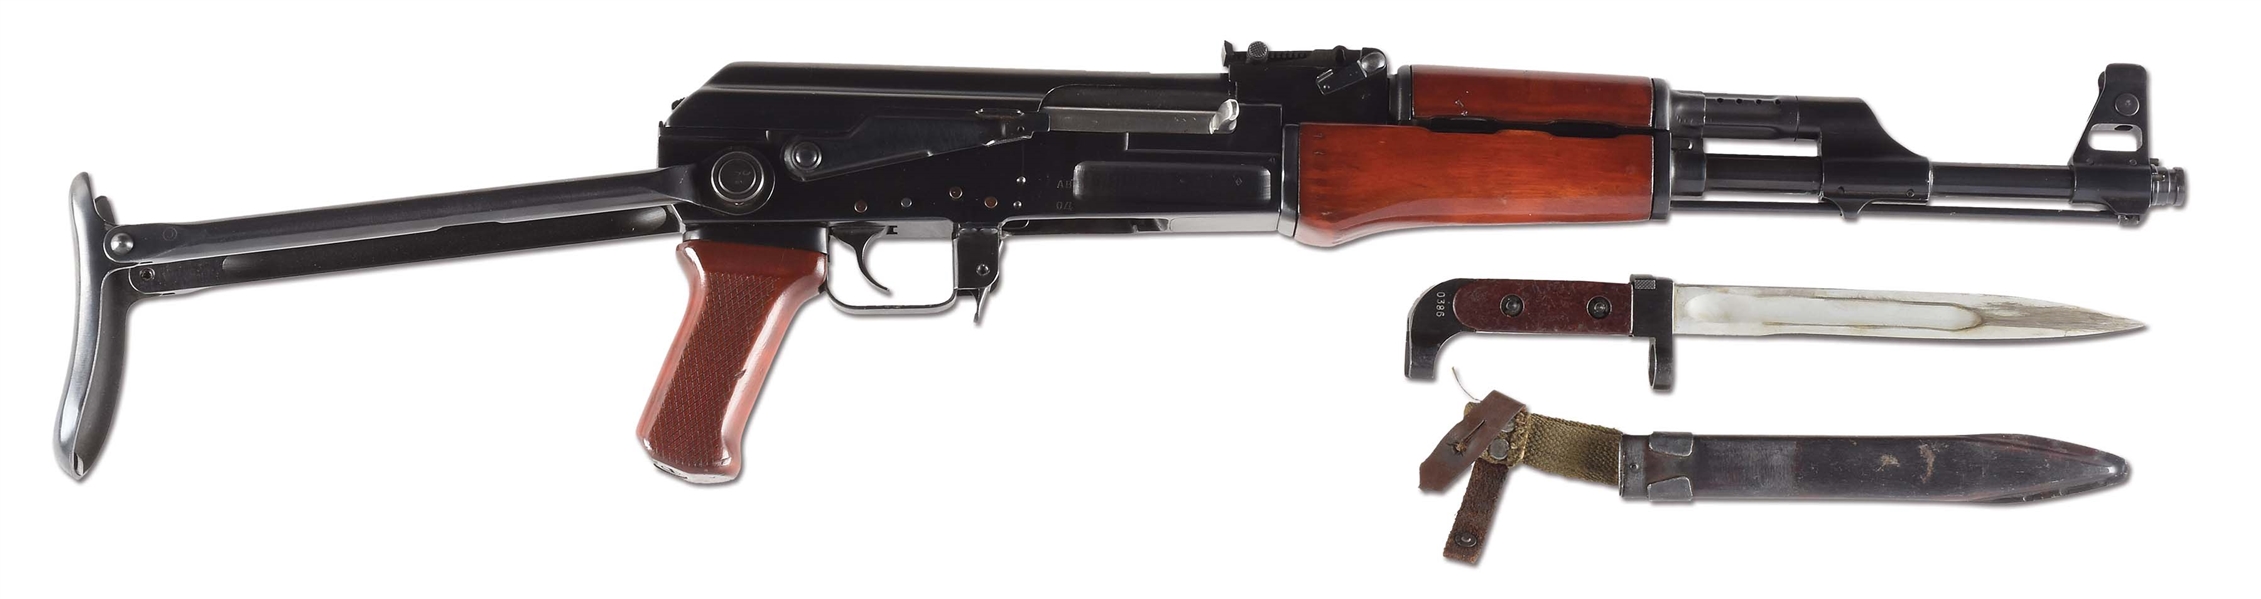 (N) EXCEPTIONALLY ATTRACTIVE FLEMING REGISTERED RUSSIAN FOLDING STOCK AK-47 MACHINE GUN (FULLY TRANSFERABLE).